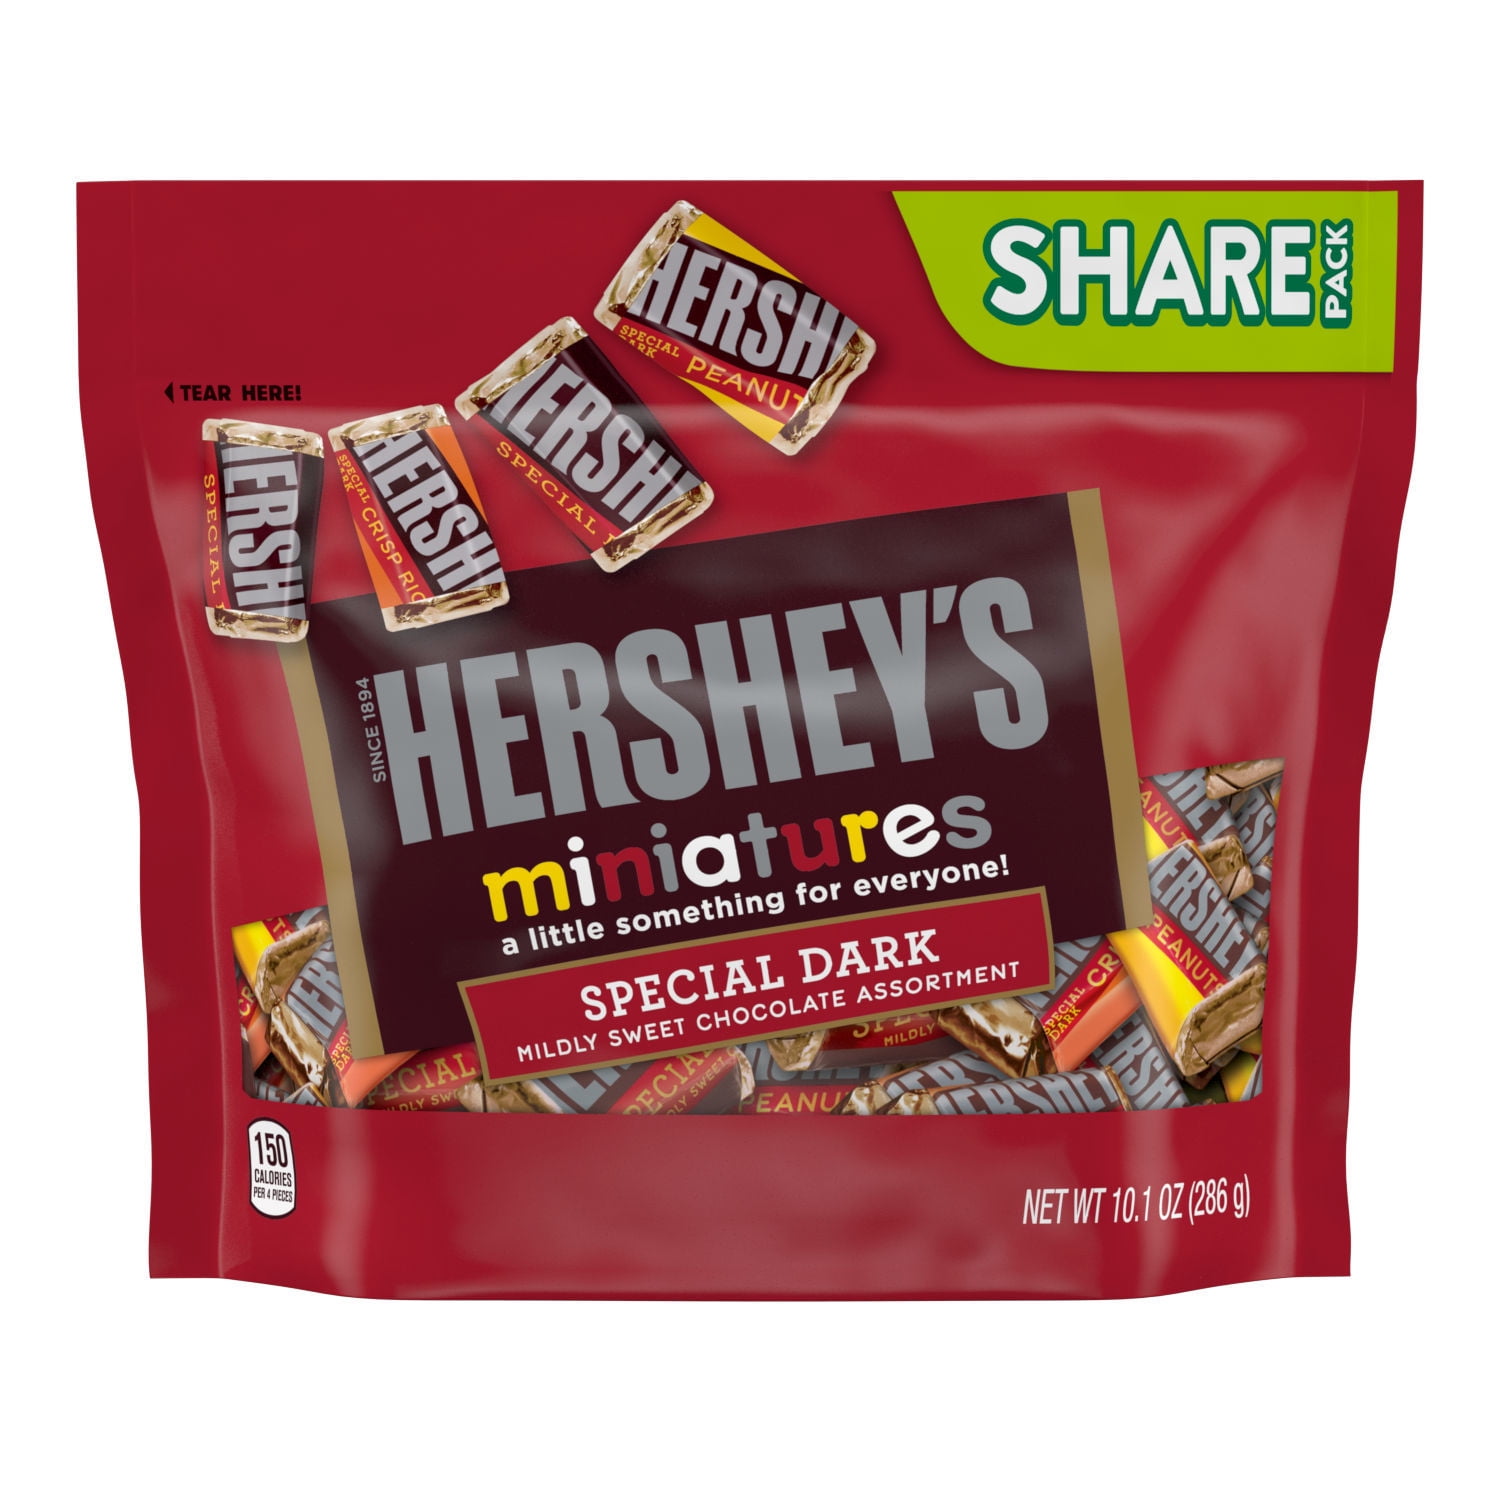 Hershey's Special Dark Miniatures Assorted Dark Chocolate Candy Bars, Individually Wrapped, 10.1 oz, Share Pack